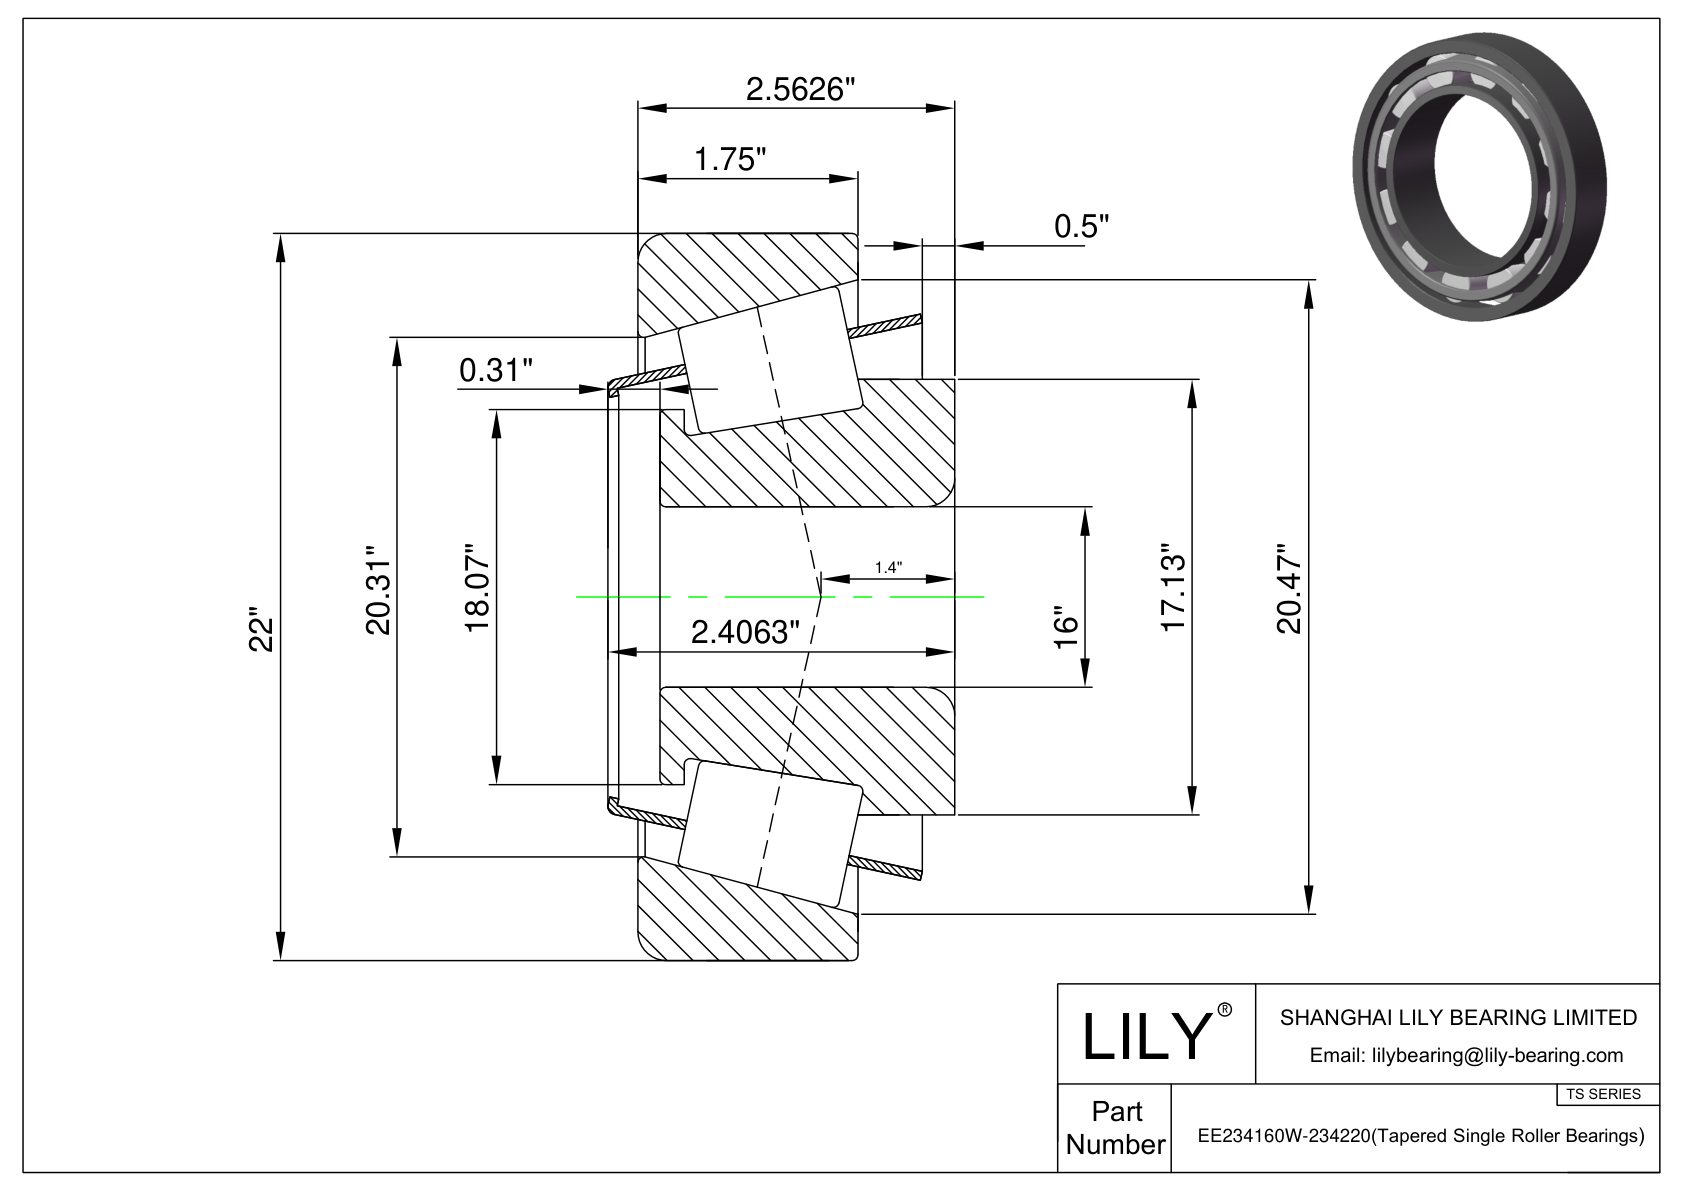 EE234160W-234220 TS (Tapered Single Roller Bearings) (Imperial) cad drawing